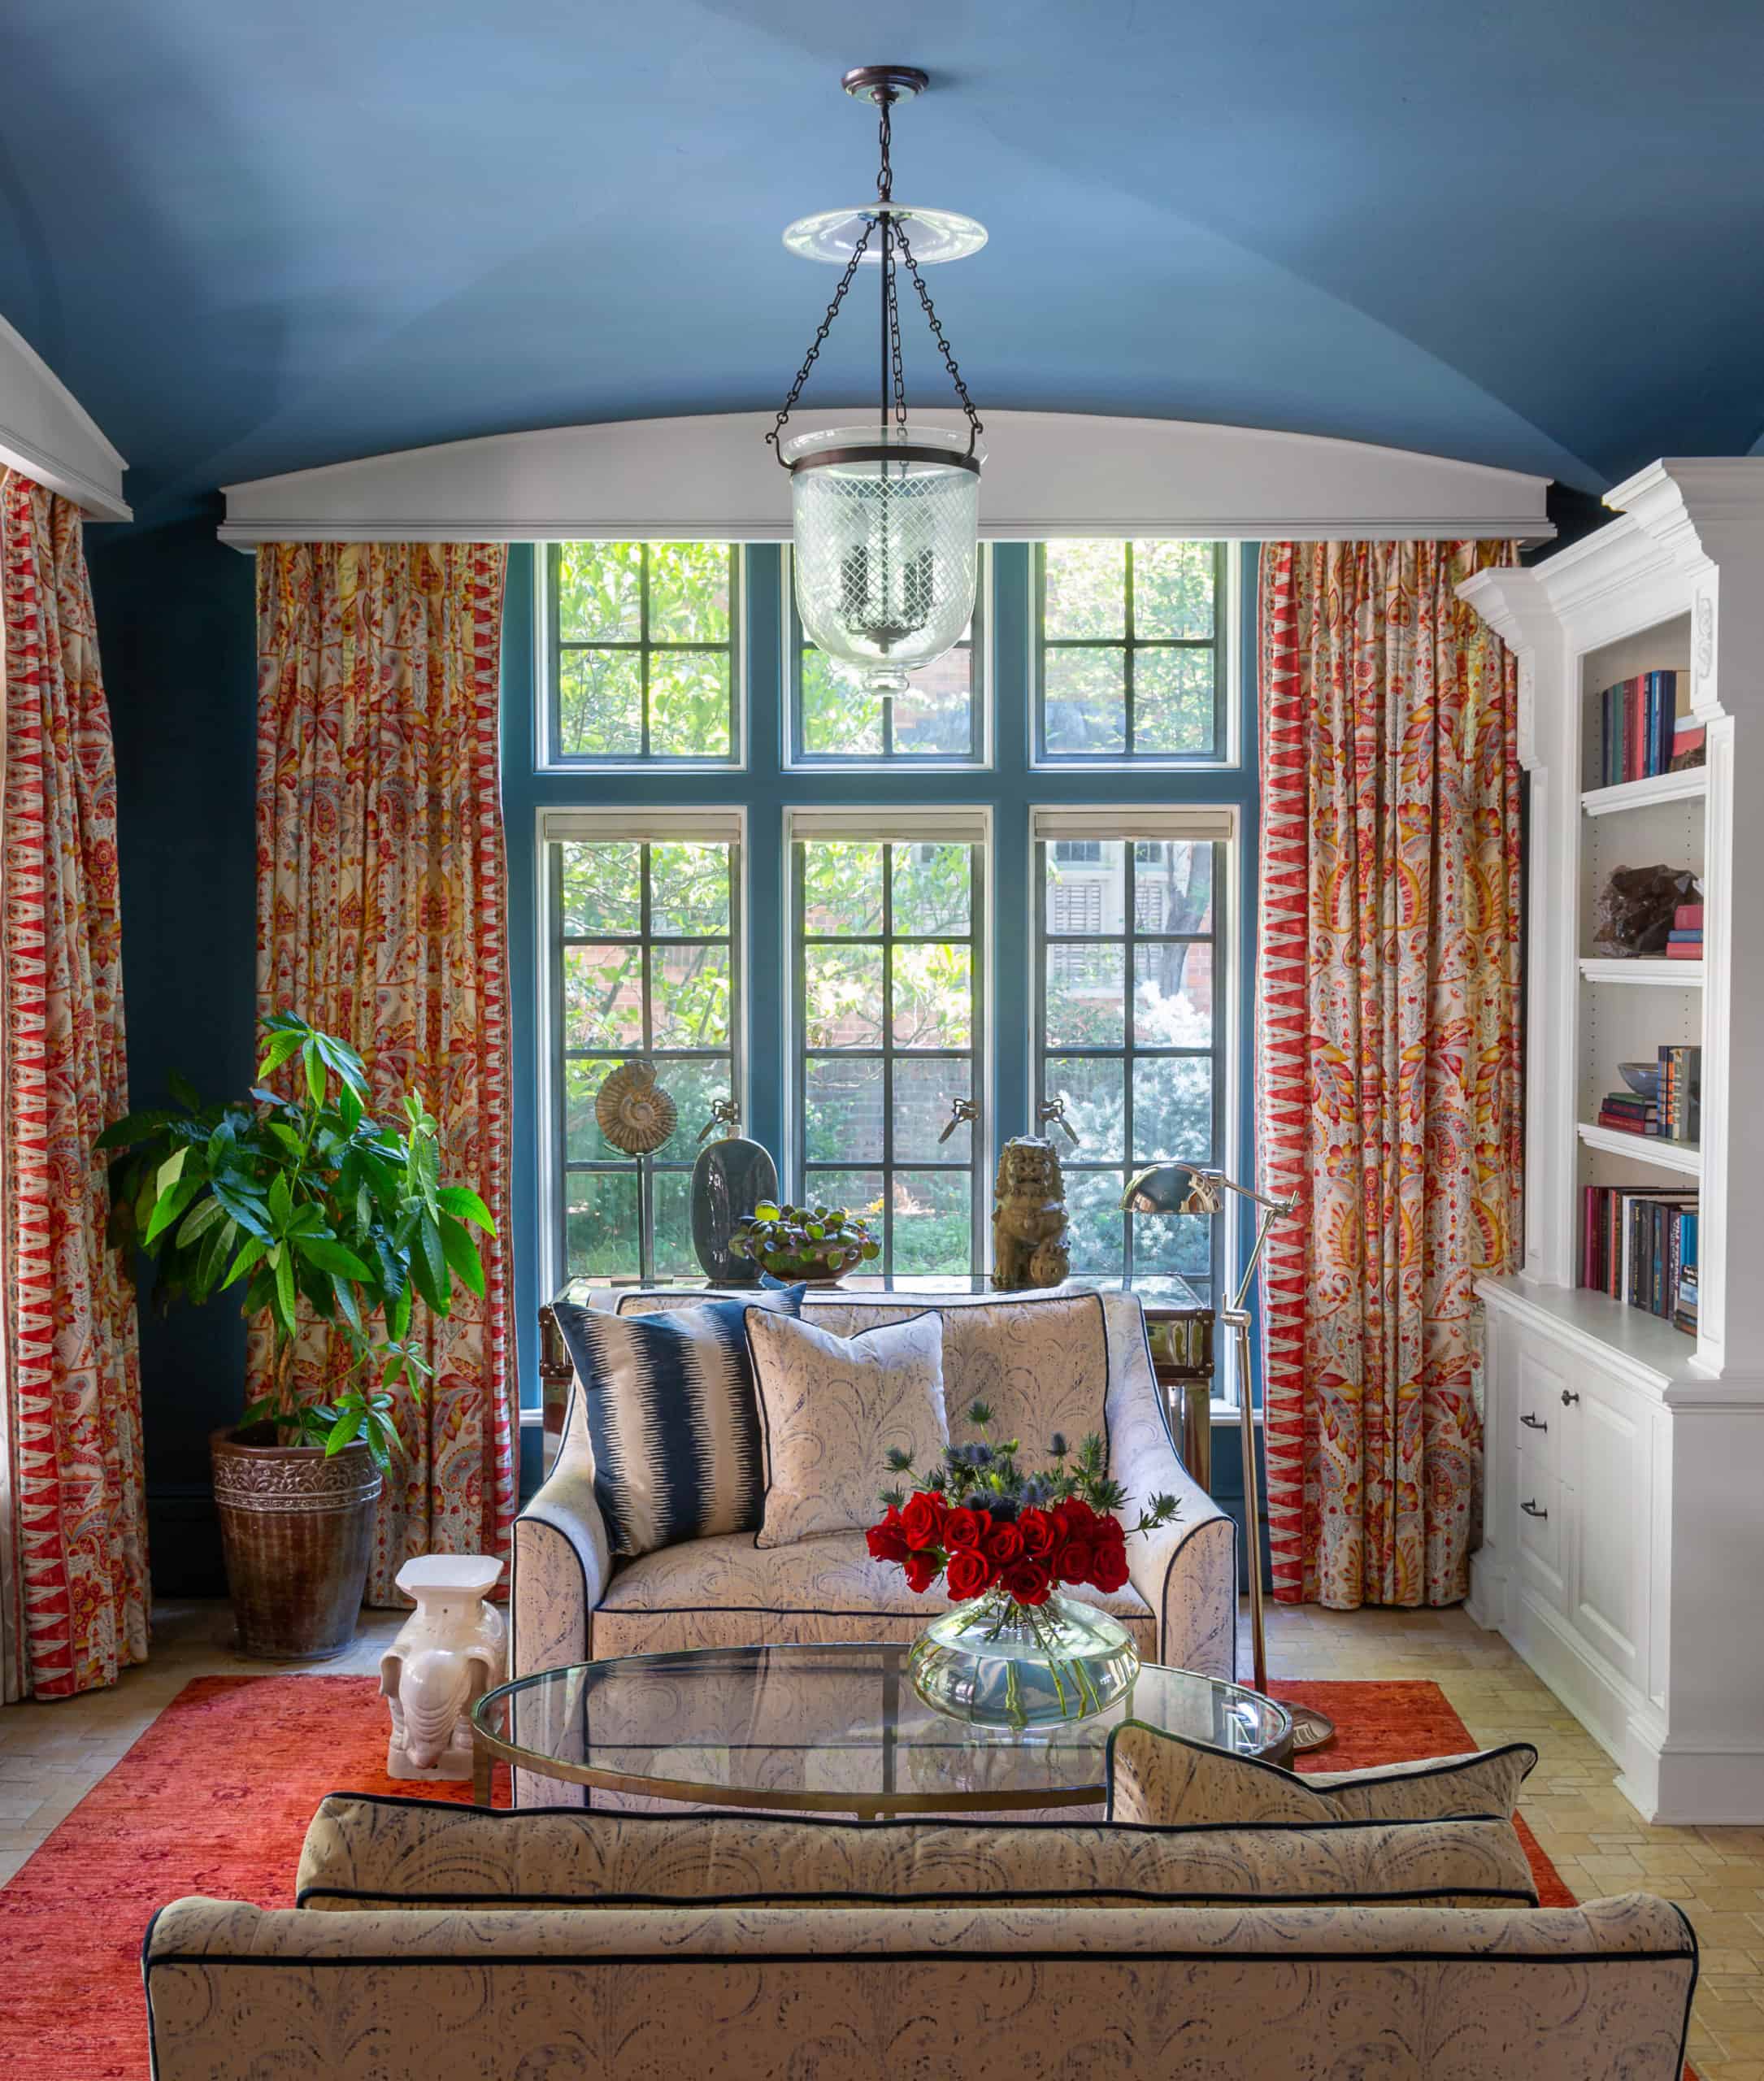 Decorating with patterned draperies, paisley chair and a half chairs and a blue ceiling